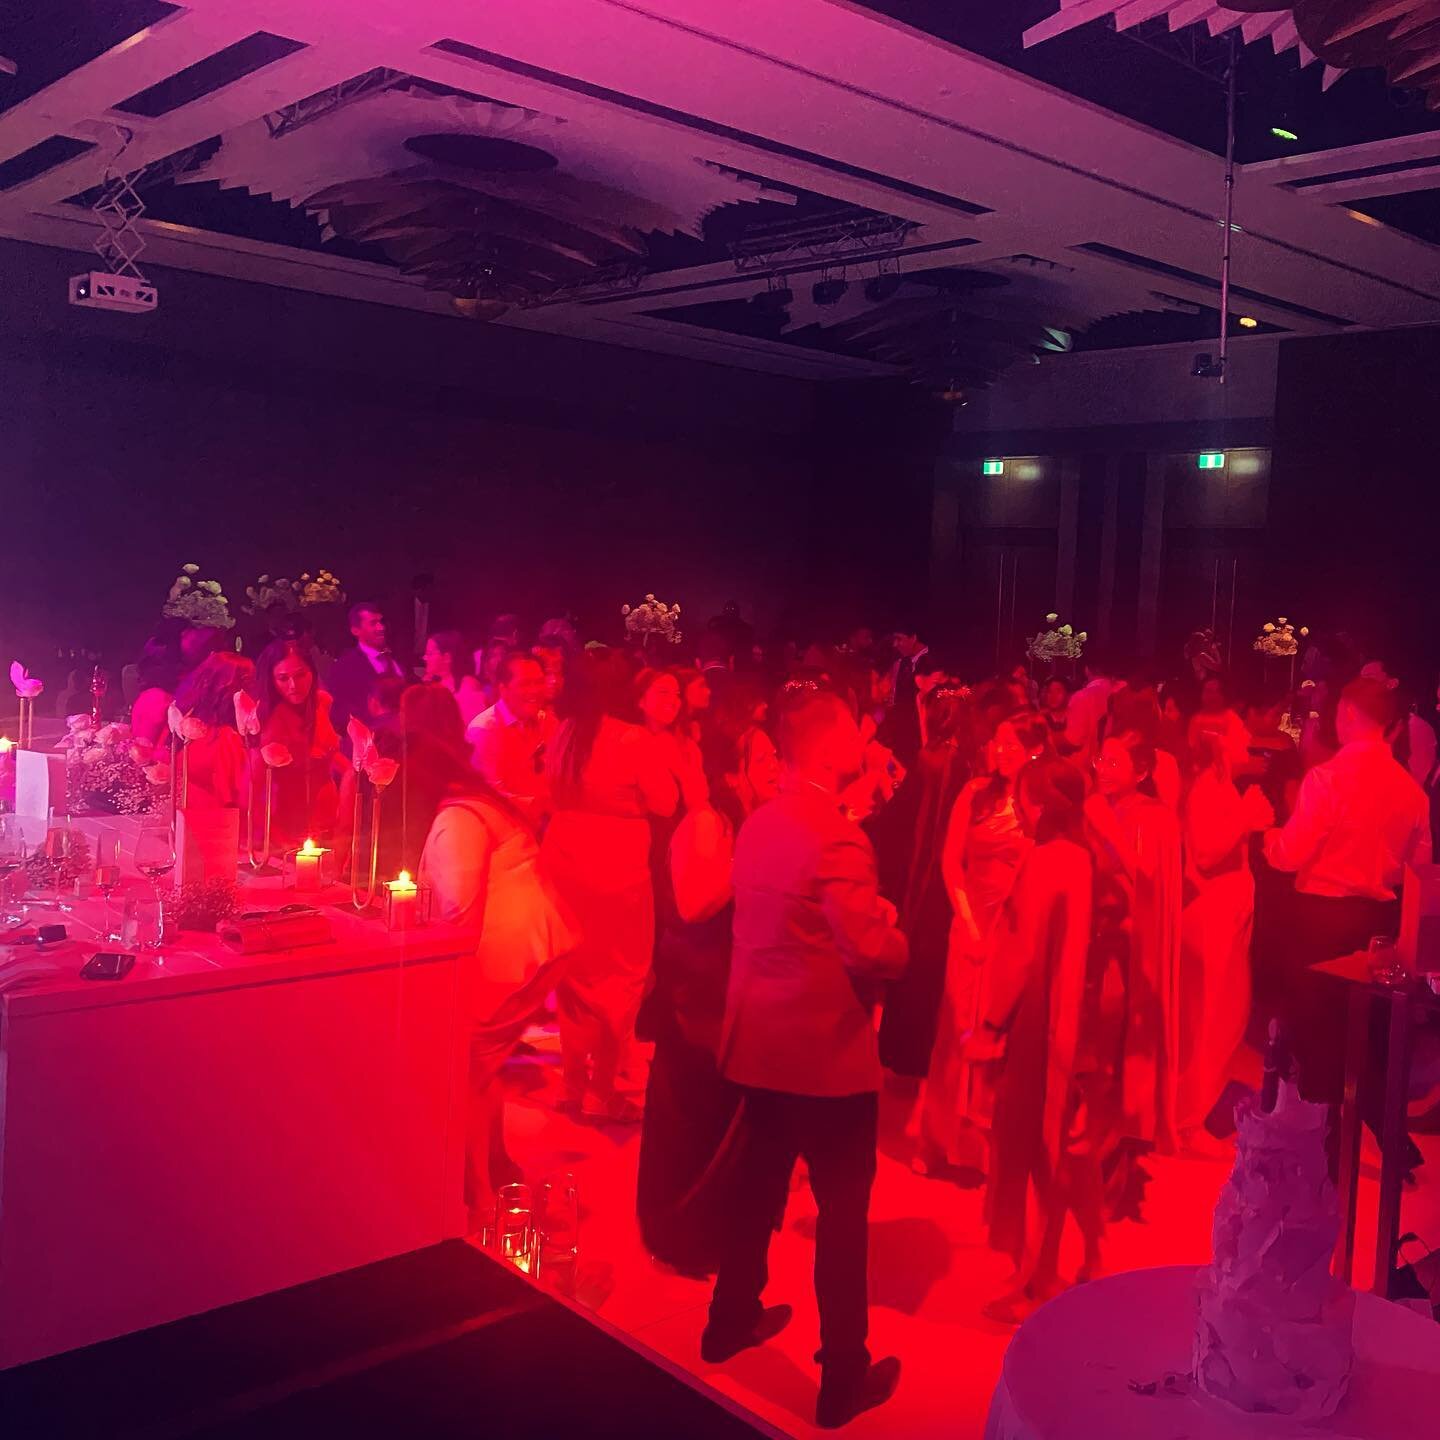 A massive congratulations to Sophia &amp; Sheranga for having us for their wedding celebrations at @crownperth 👑

🇵🇭 👰🏻&zwj;♀️❤️🤵🏿&zwj;♂️🇱🇰

It was a pleasure to rock the dancefloor alongside superstars @prooftheband for what was an epic nig